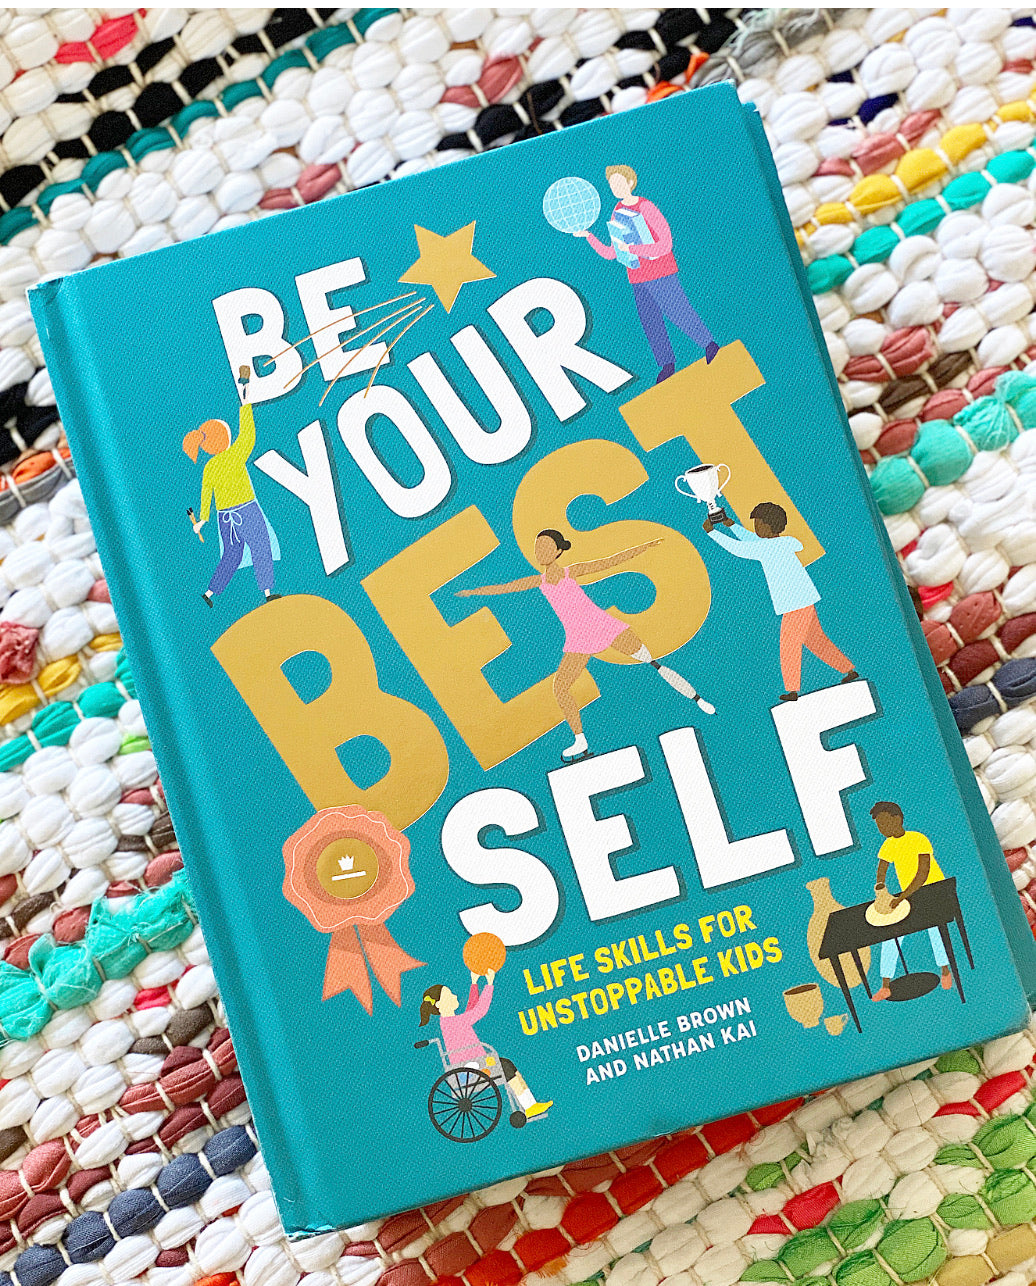 Be Your Best Self: Life Skills for Unstoppable Kids | Brown, Kai